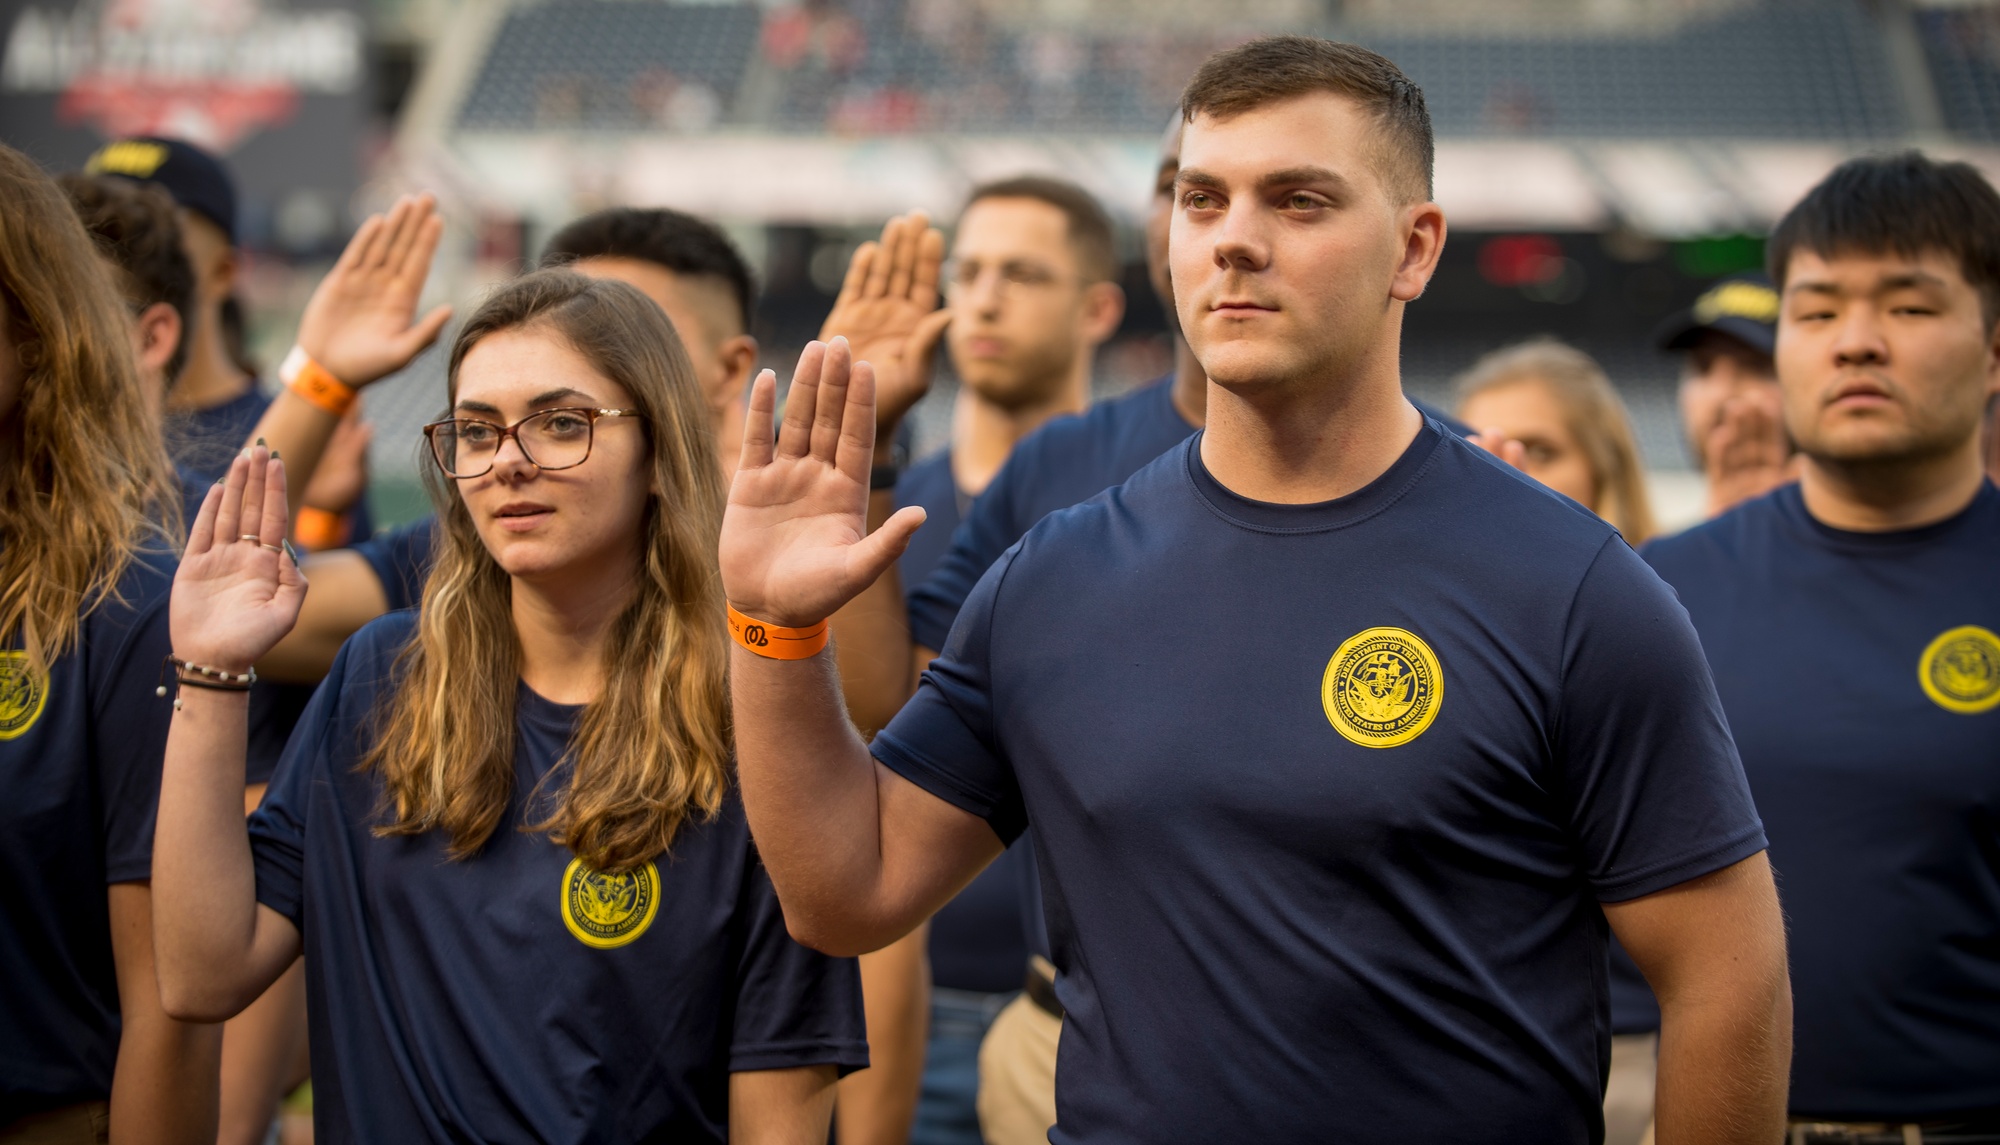 DVIDS - Images - Navy Day at Nationals Park [Image 1 of 12]